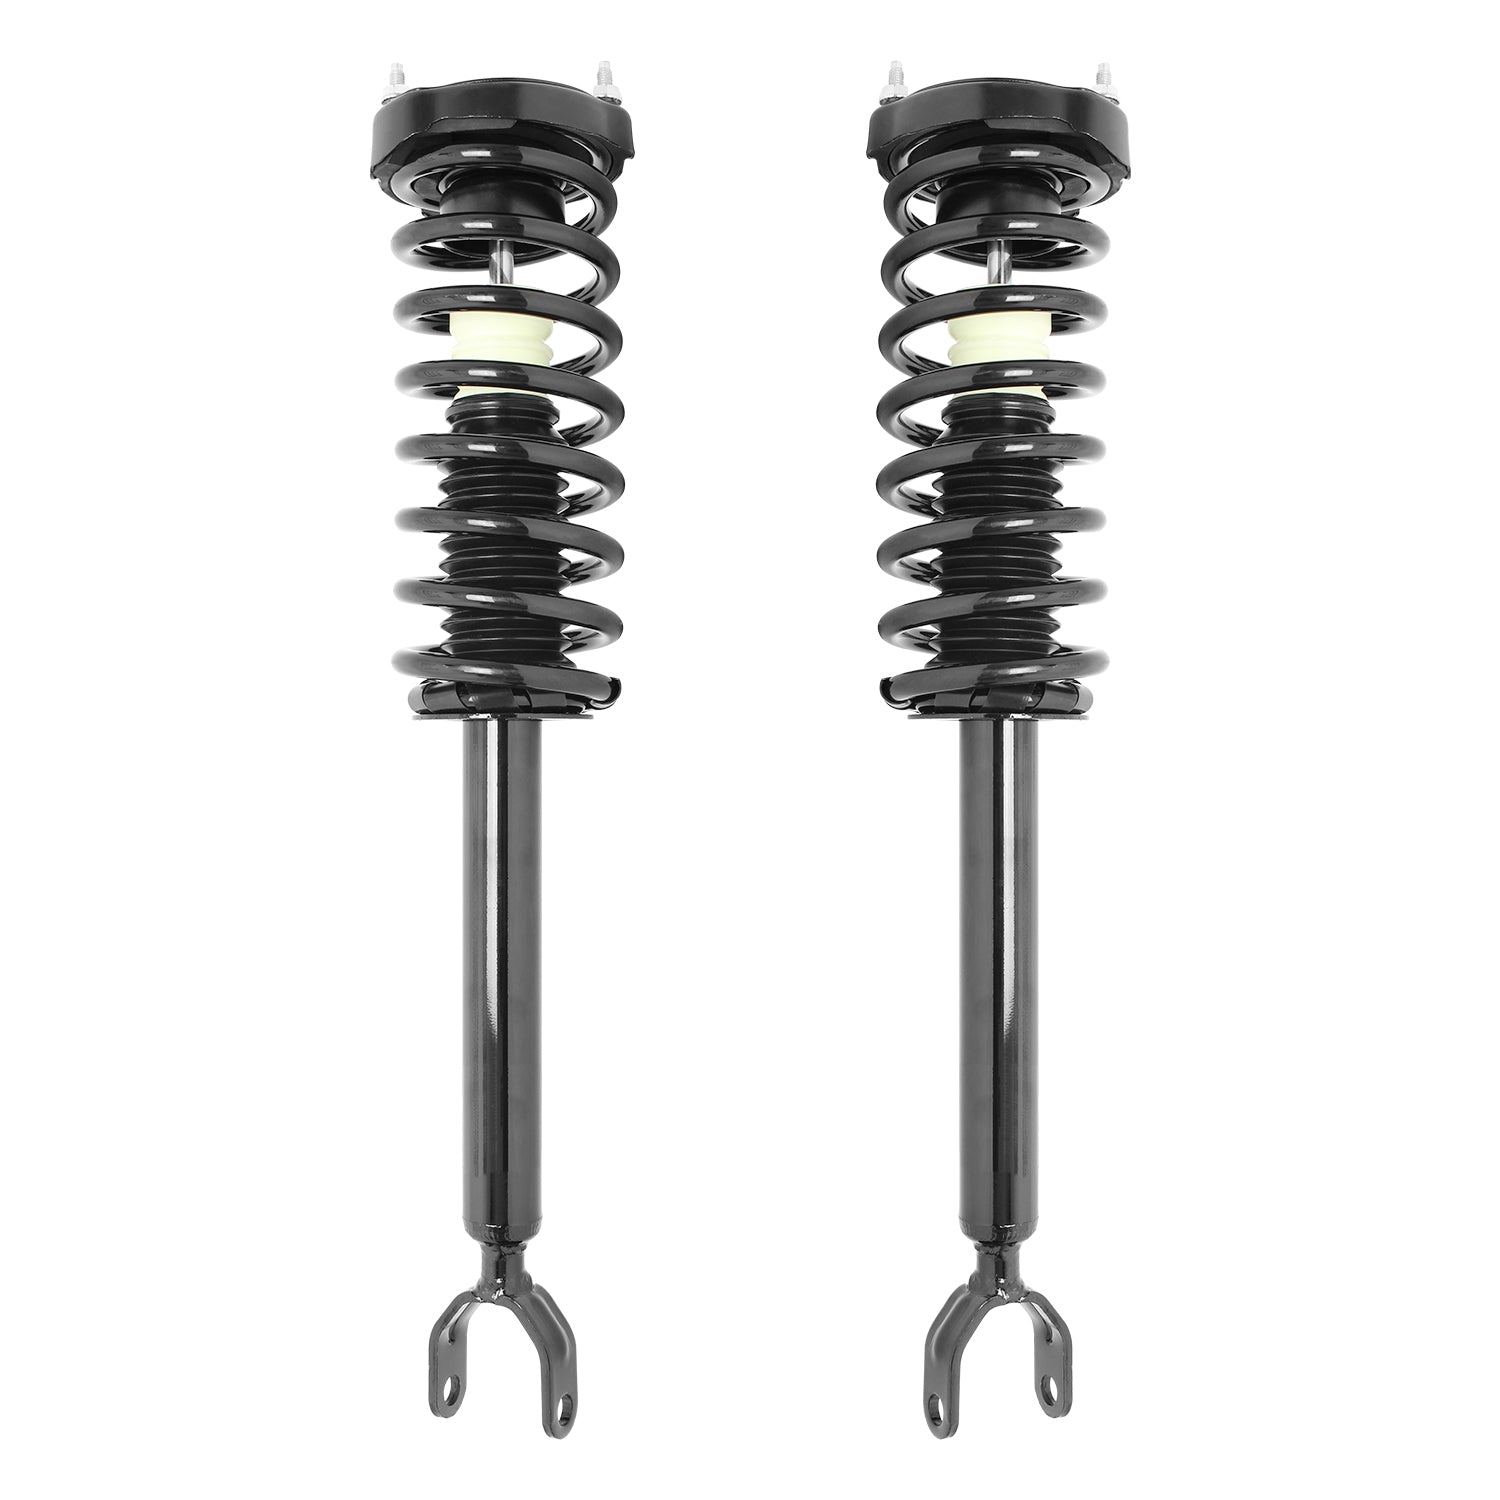 Unity 2-11520-001 Front Pair Complete Struts and Coil Spring Assemblies for Mercedes-Benz